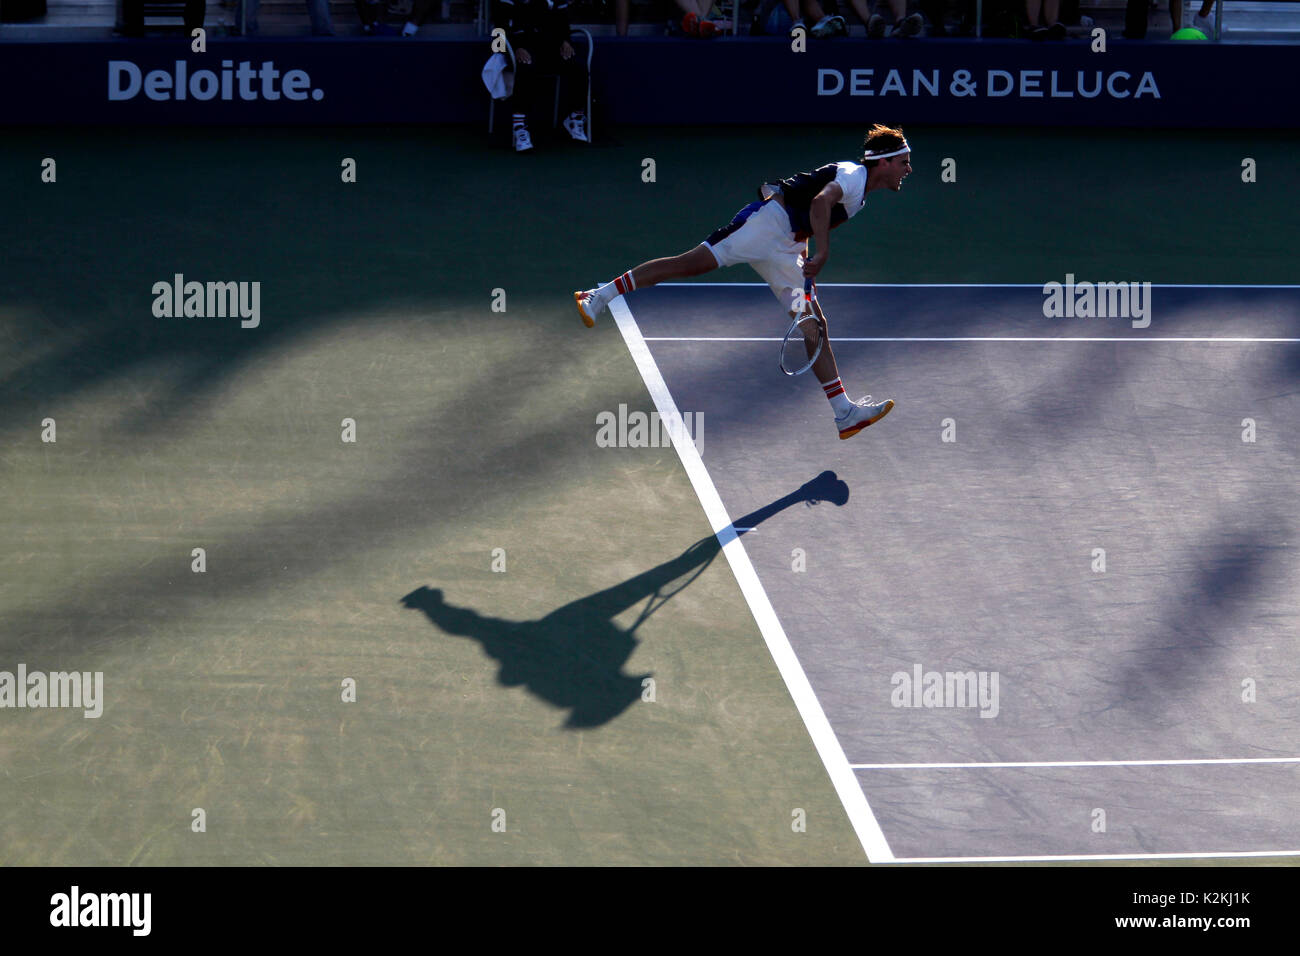 New York, United States. 31st Aug, 2017. US Open Tennis: New York, 31 August, 2017 - Austria's Dominic Thiem serving during his second round match against Taylor Frtiz of the United States at the US Open in Flushing Meadows, New York. Credit: Adam Stoltman/Alamy Live News Stock Photo